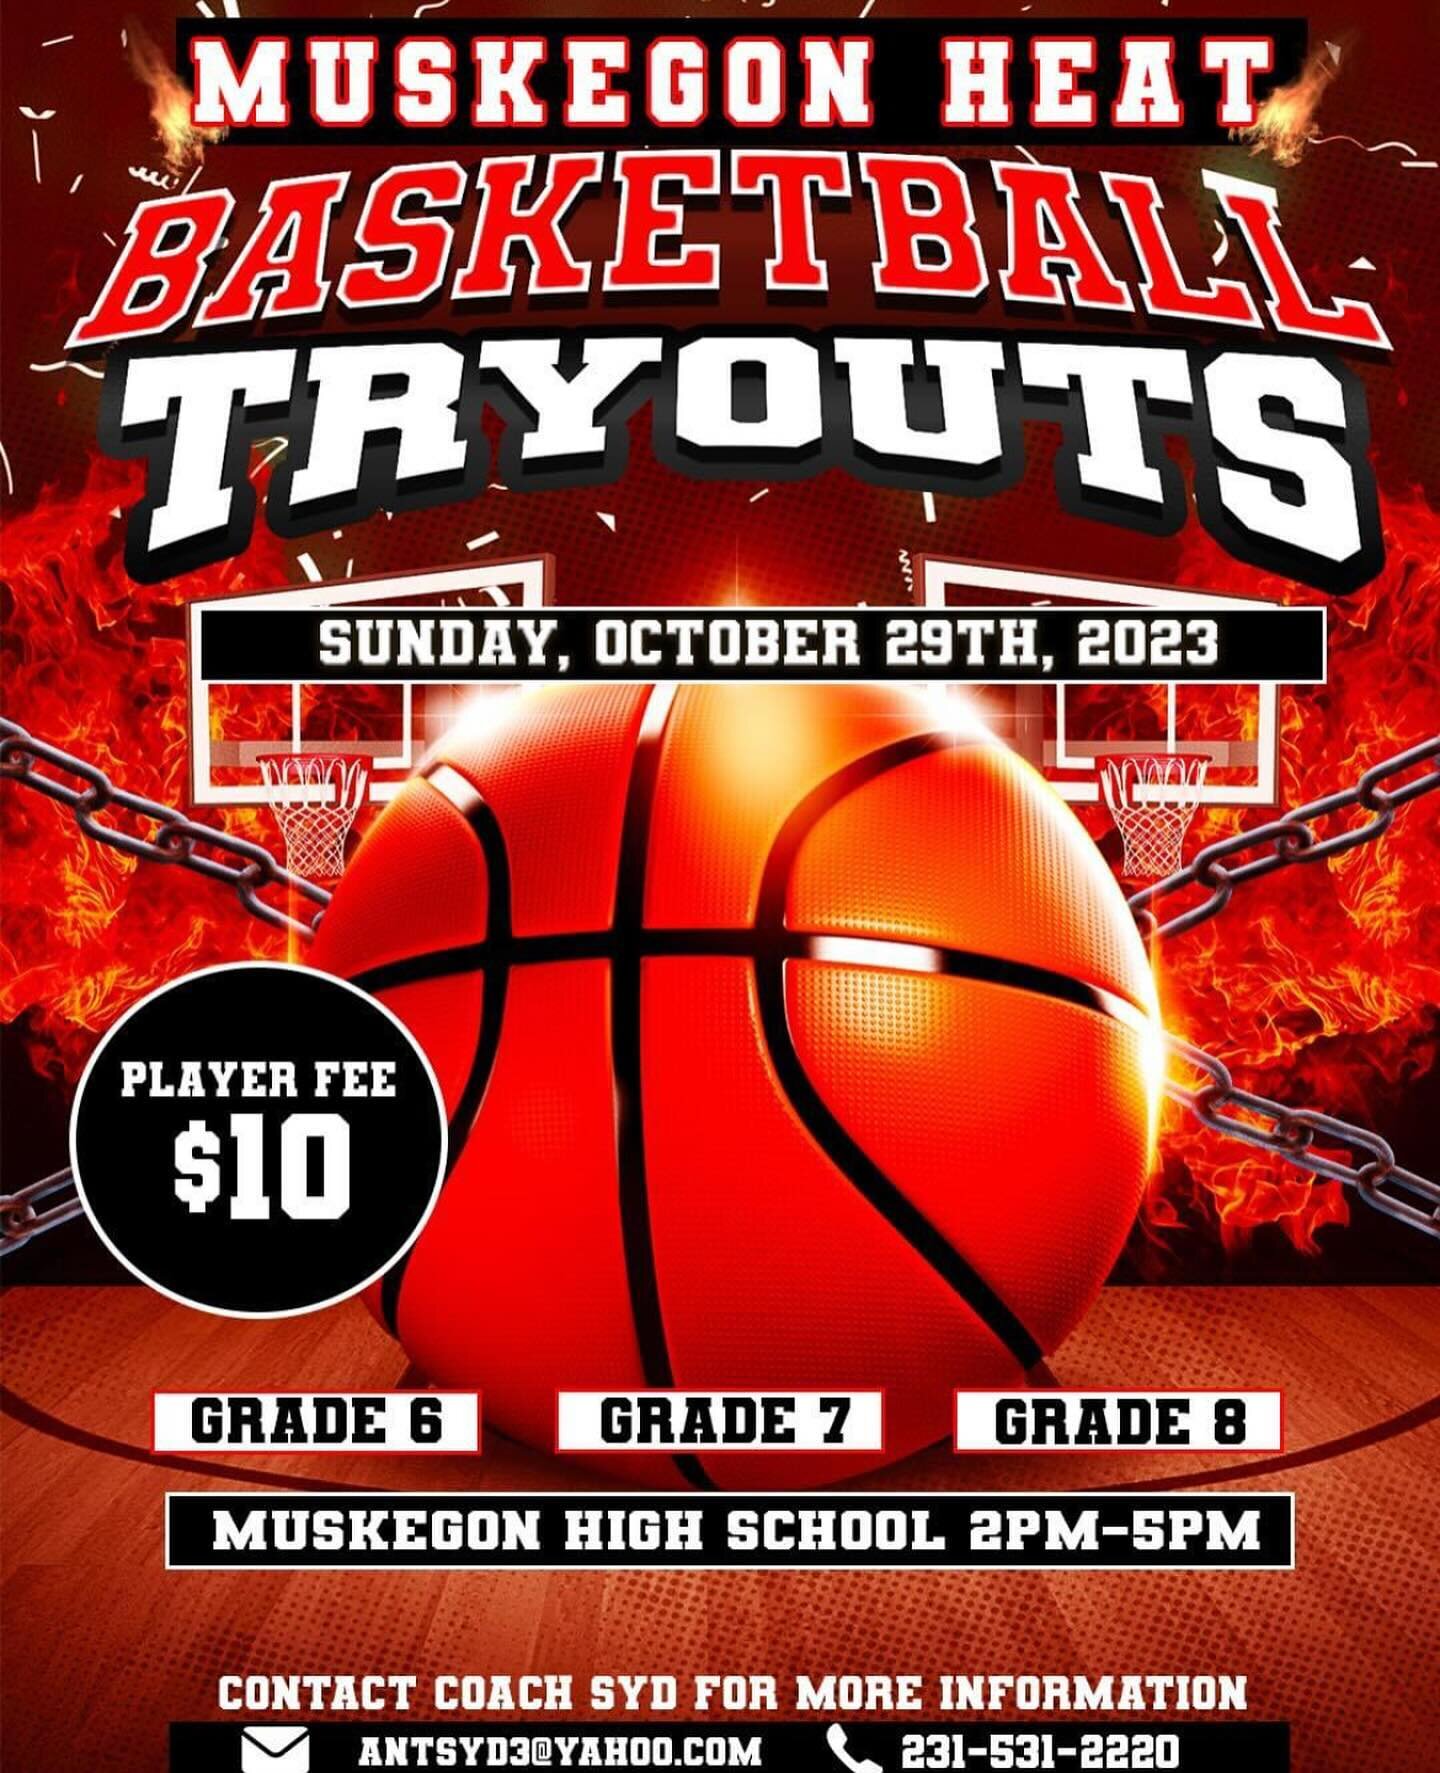 Excited to announce our first Muskegon Heat tryouts🔥
6th, 7th, and 8th grade
@Muskegon High School 
October 29th
2-5pm
It&rsquo;s that time of year 💪